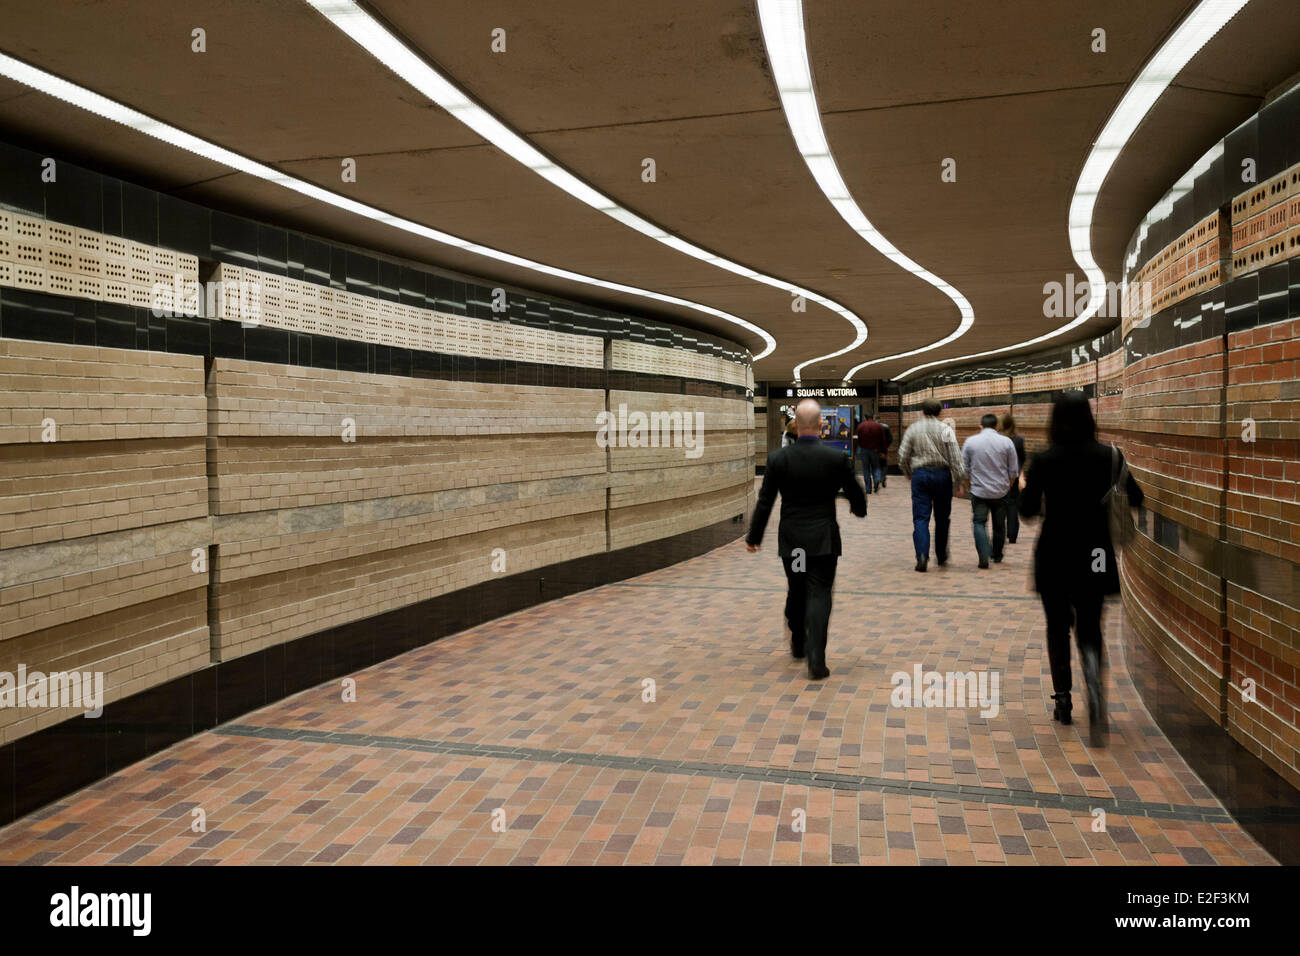 Canada, Quebec province, Montreal, the Underground City, pedestrian tunnel Stock Photo